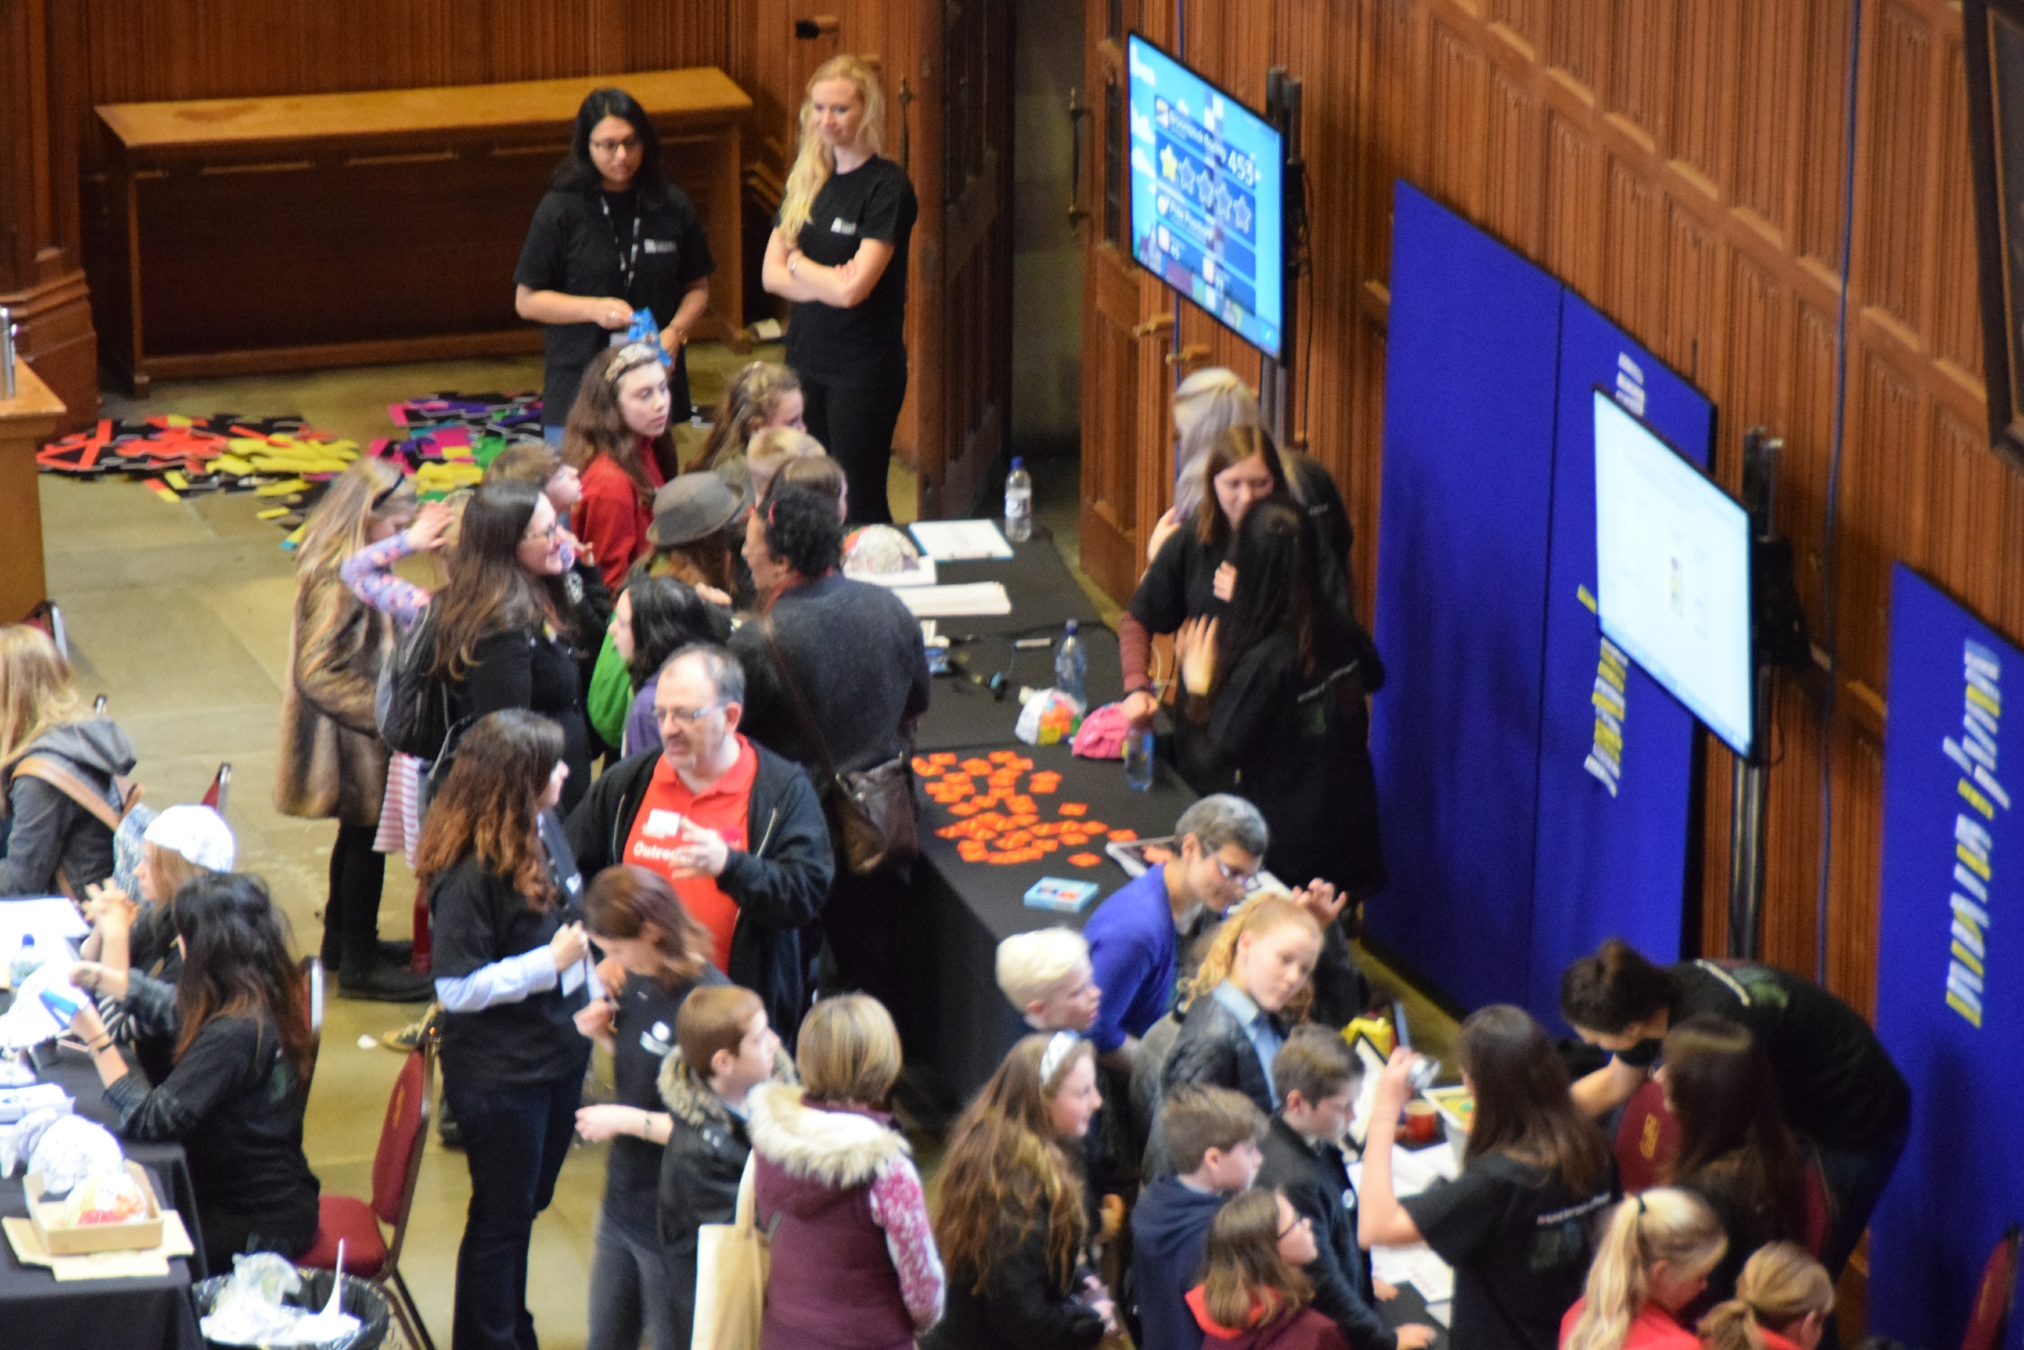 Primary school visitors viewing the exhibition stands